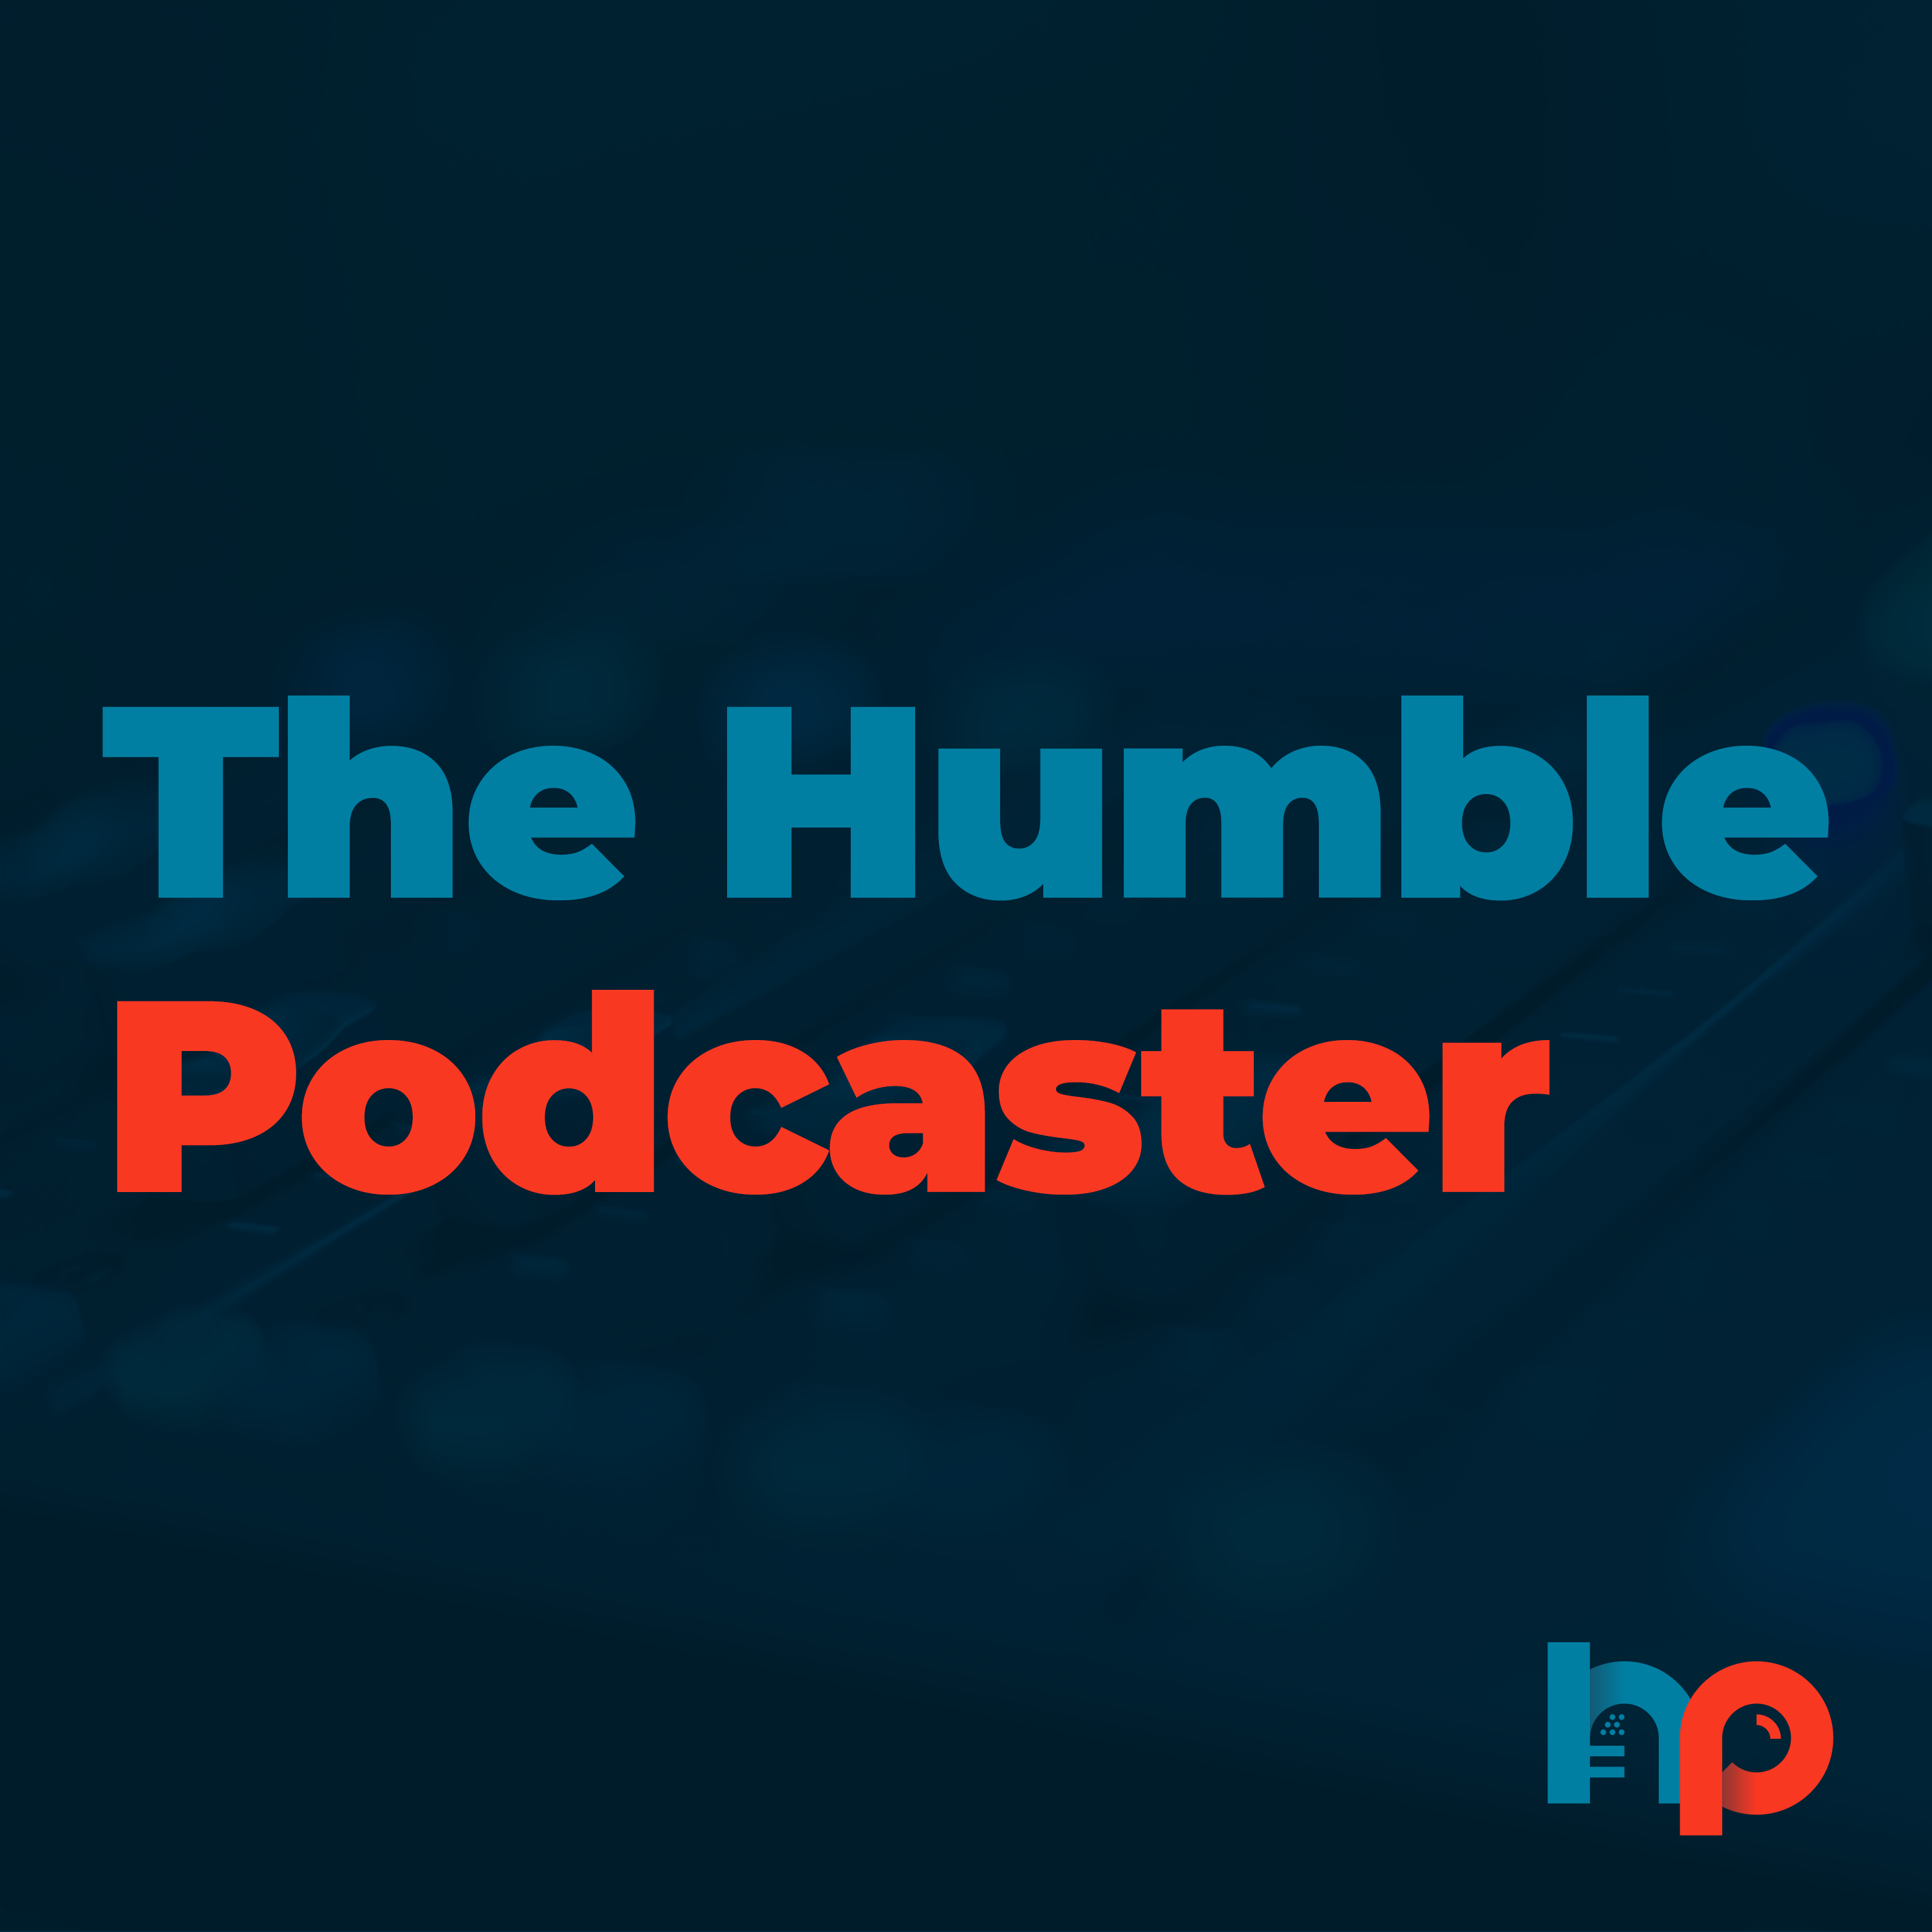 The Humble Podcaster